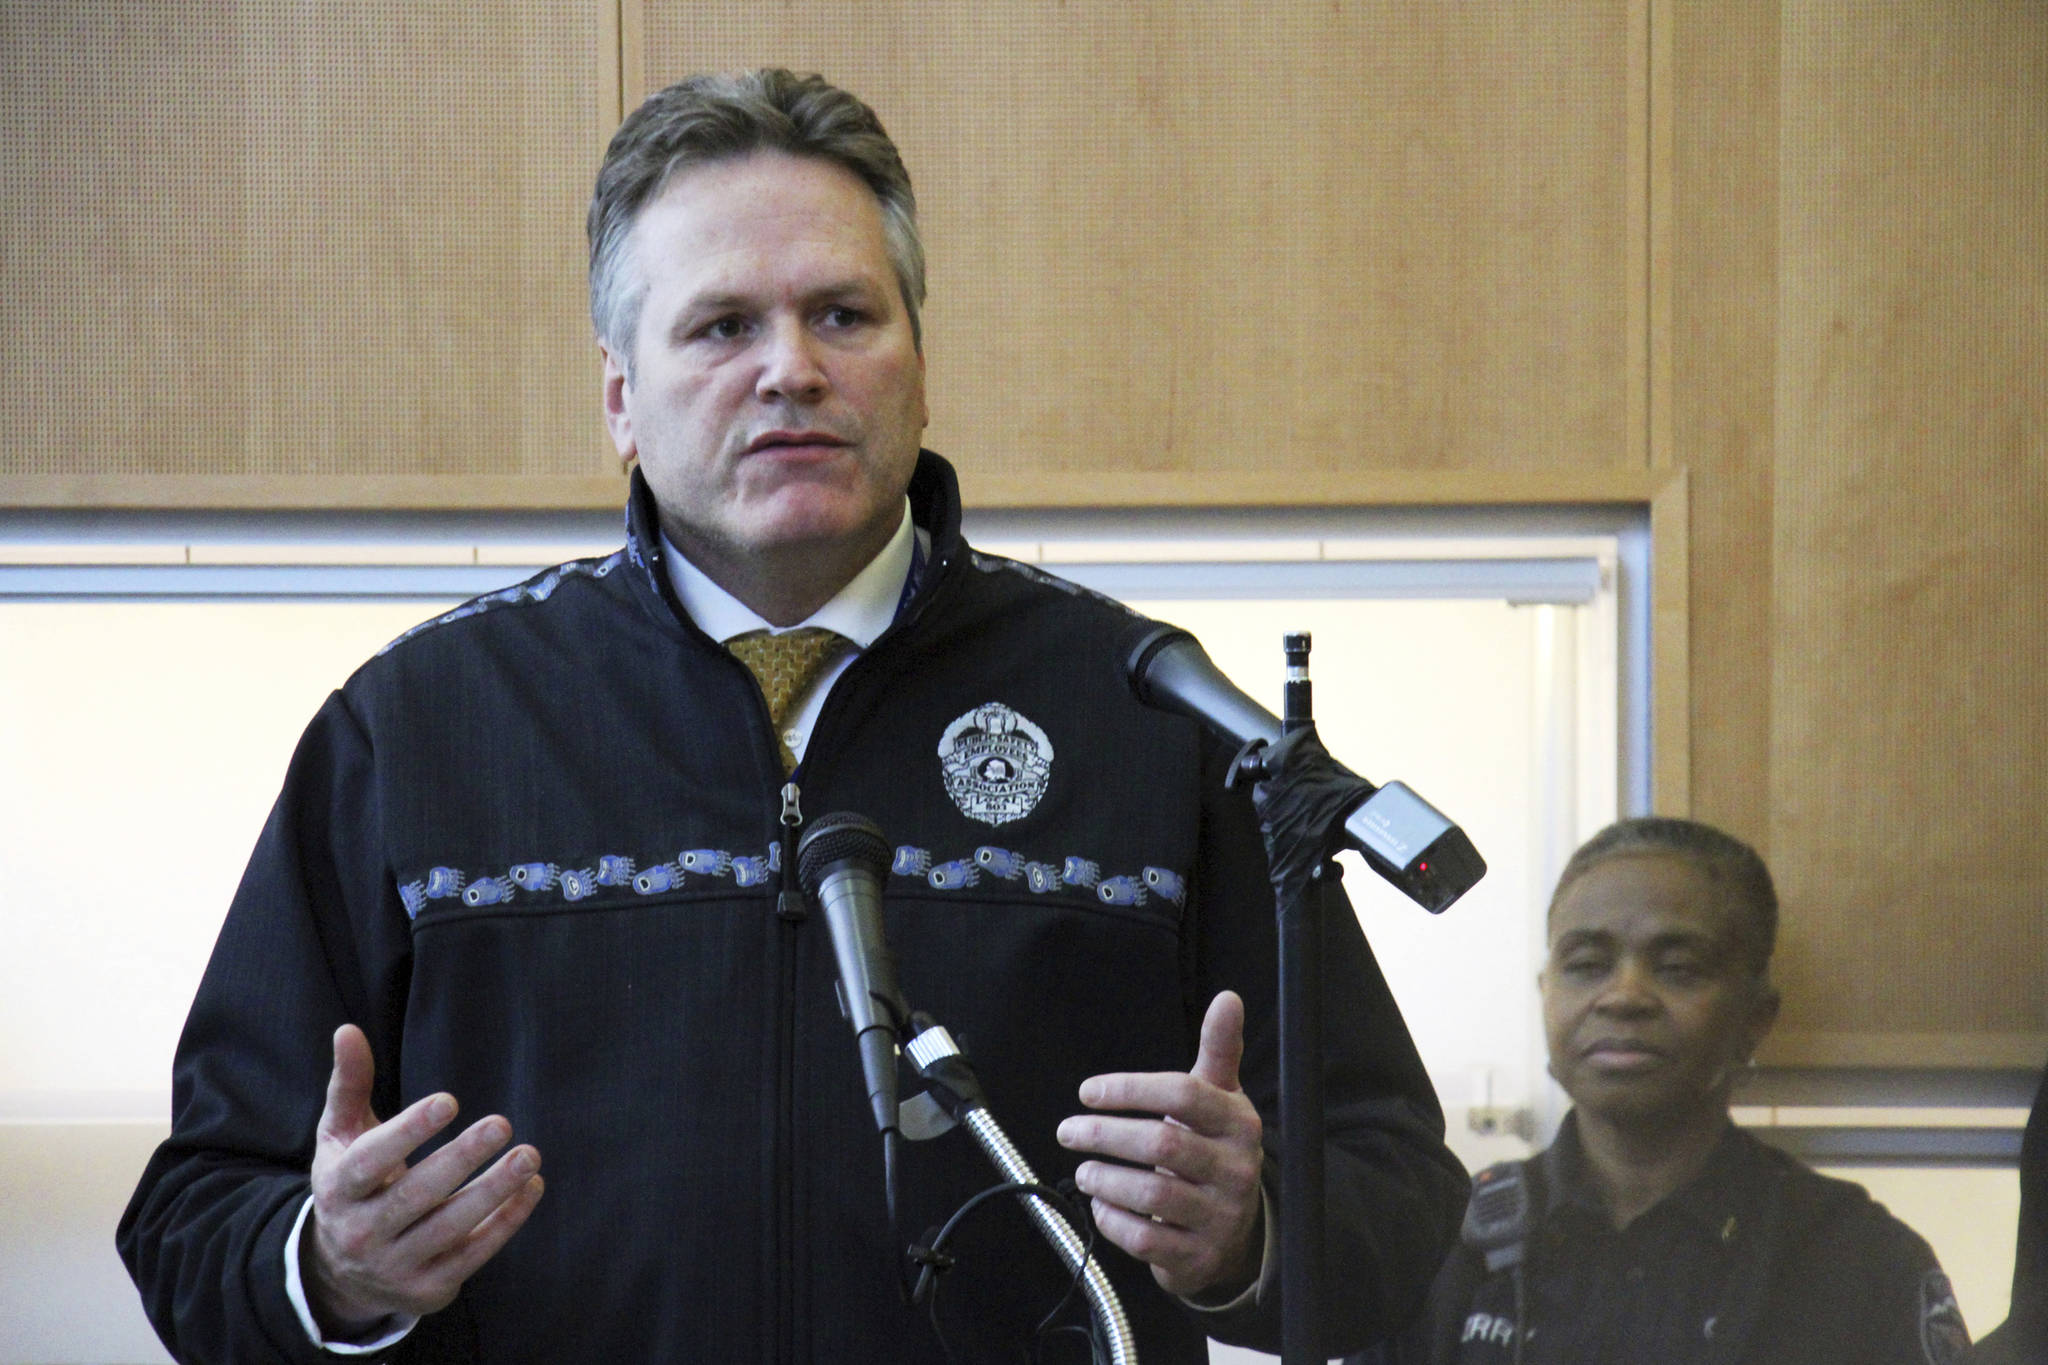 Gov. Mike Dunleavy is shown at a news conference Wednesday, Dec. 5, 2018 in Anchorage. (Mark Thiessen | Associated Press)                                Gov. Mike Dunleavy is shown at a news conference Dec. 5 in Anchorage. (Mark Thiessen | Associated Press)